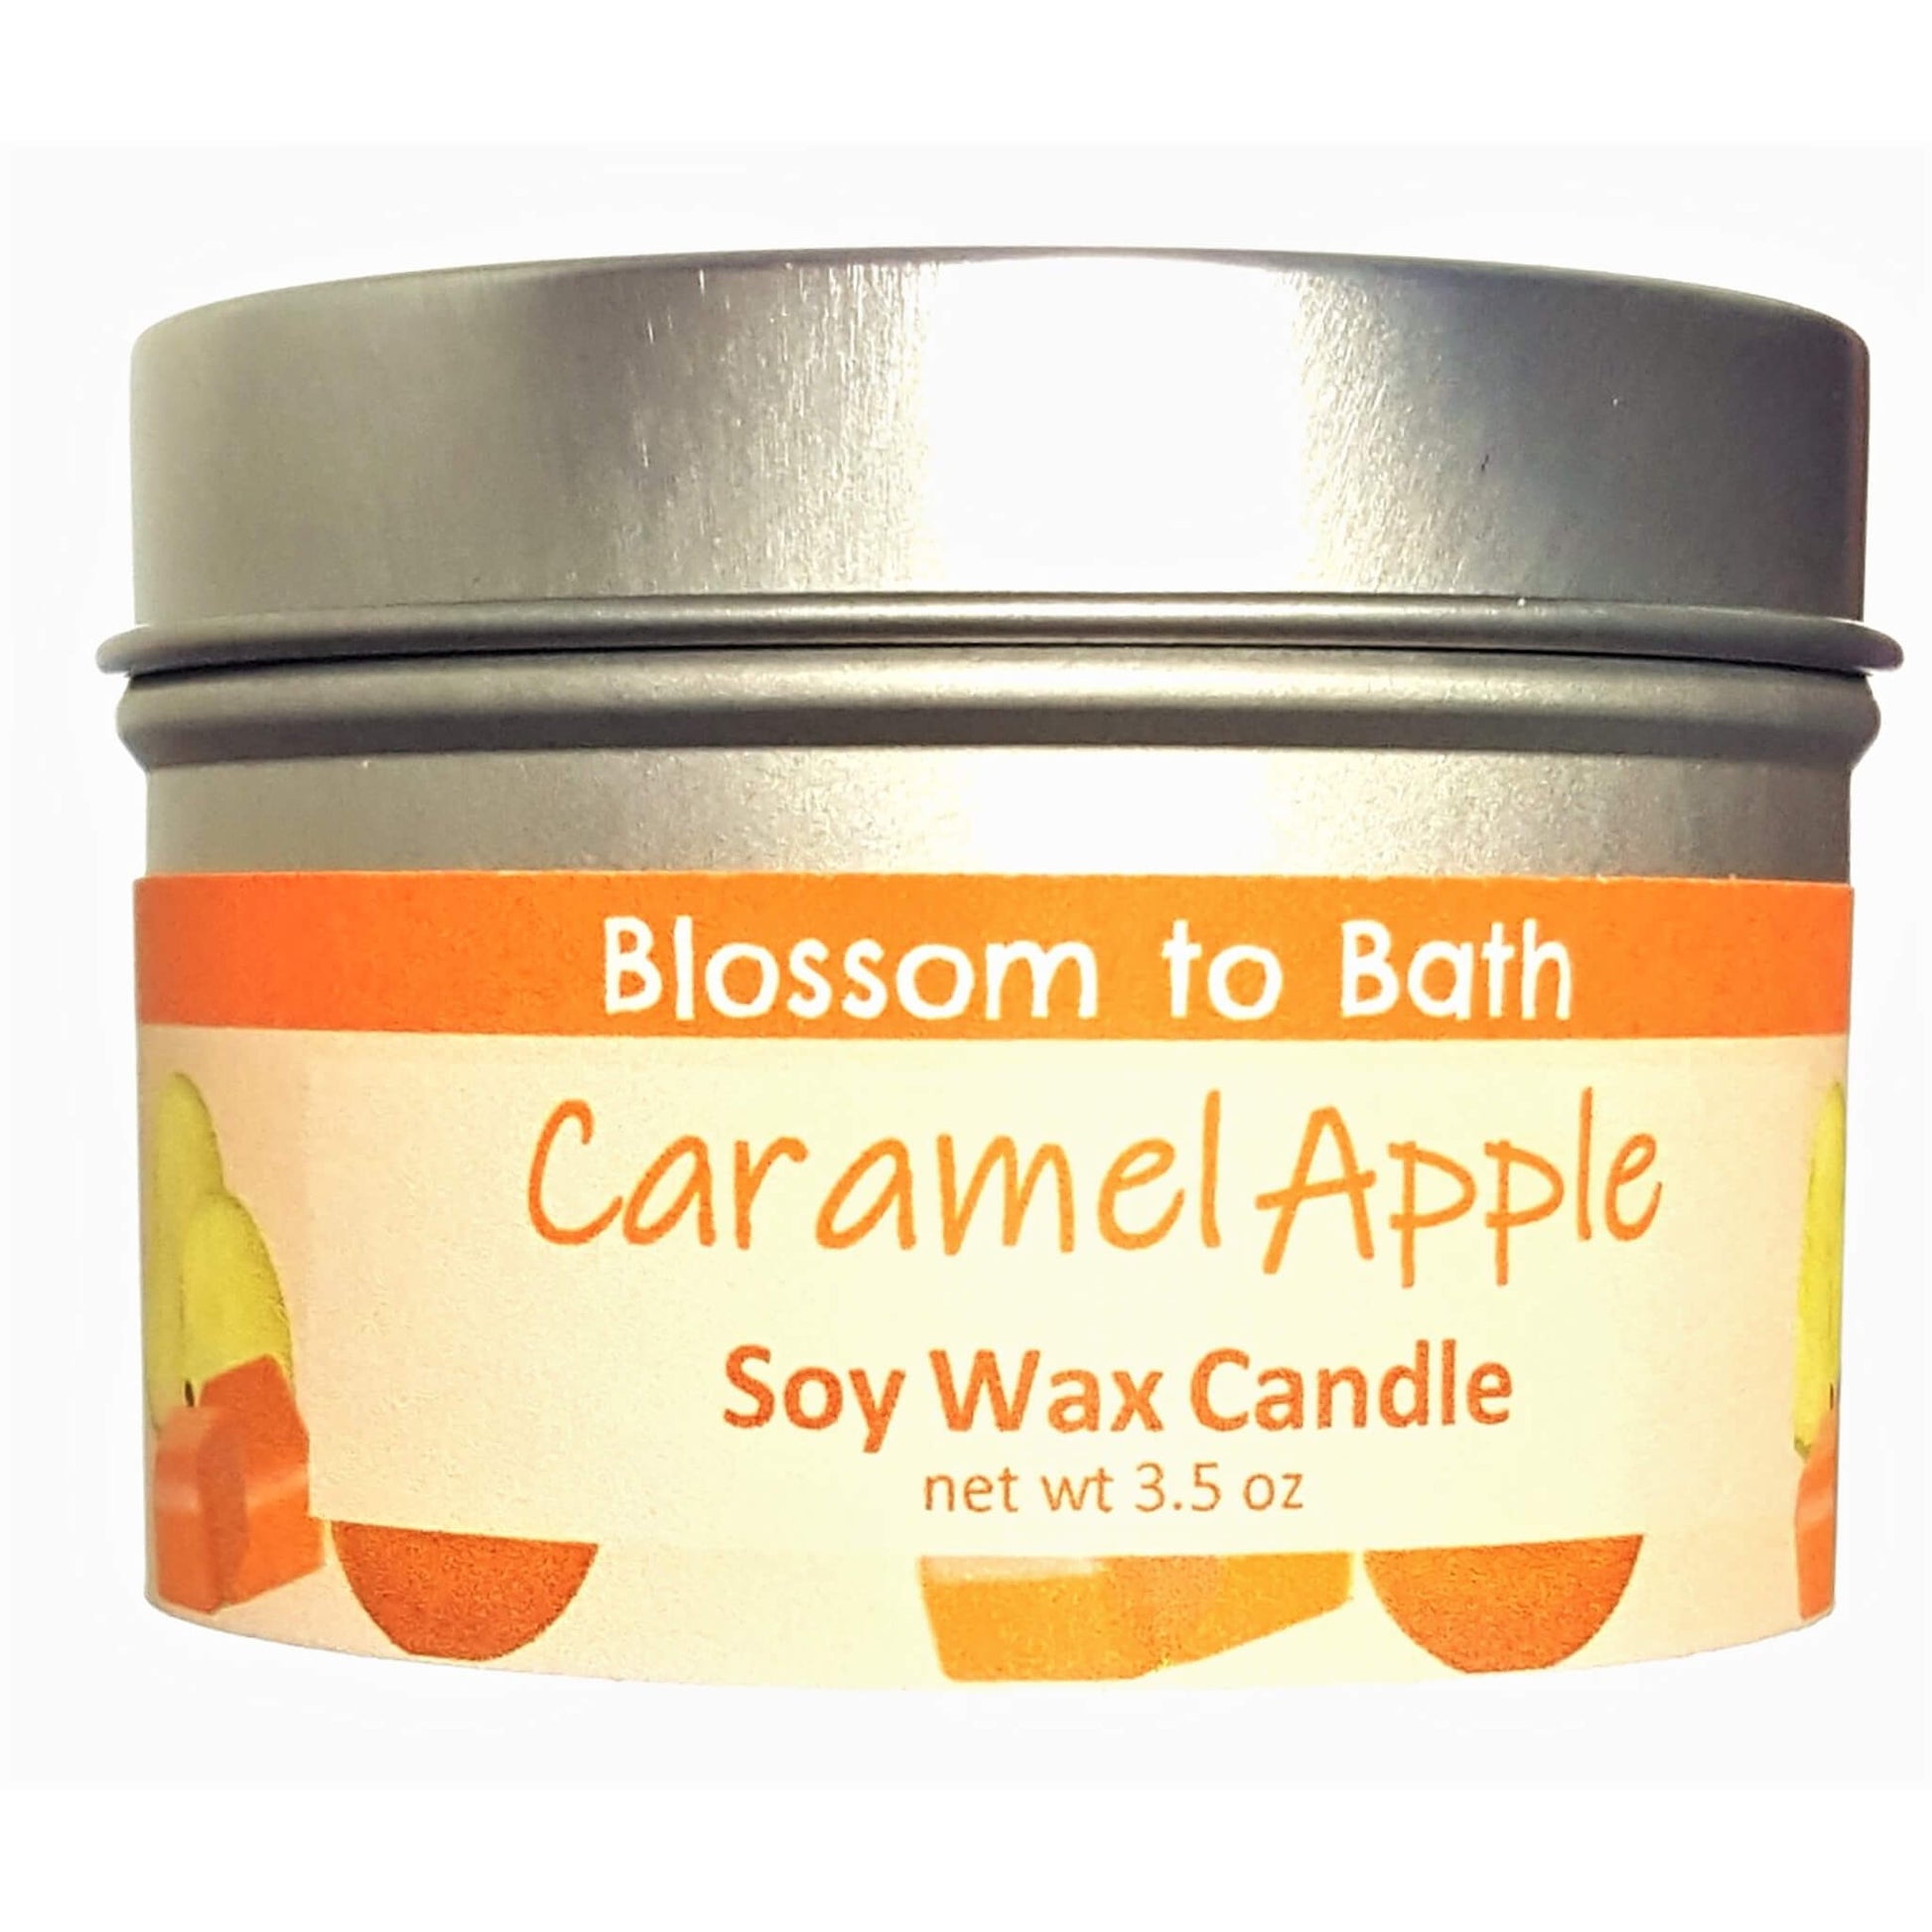 Buy Blossom to Bath Caramel Apple Soy Wax Candle from Flowersong Soap Studio.  Fill the air with a charming fragrance that lasts for hours  Bright fresh apple and warm rich caramel - a joyful combination of crisp fruit wrapped in decadent sweetness.